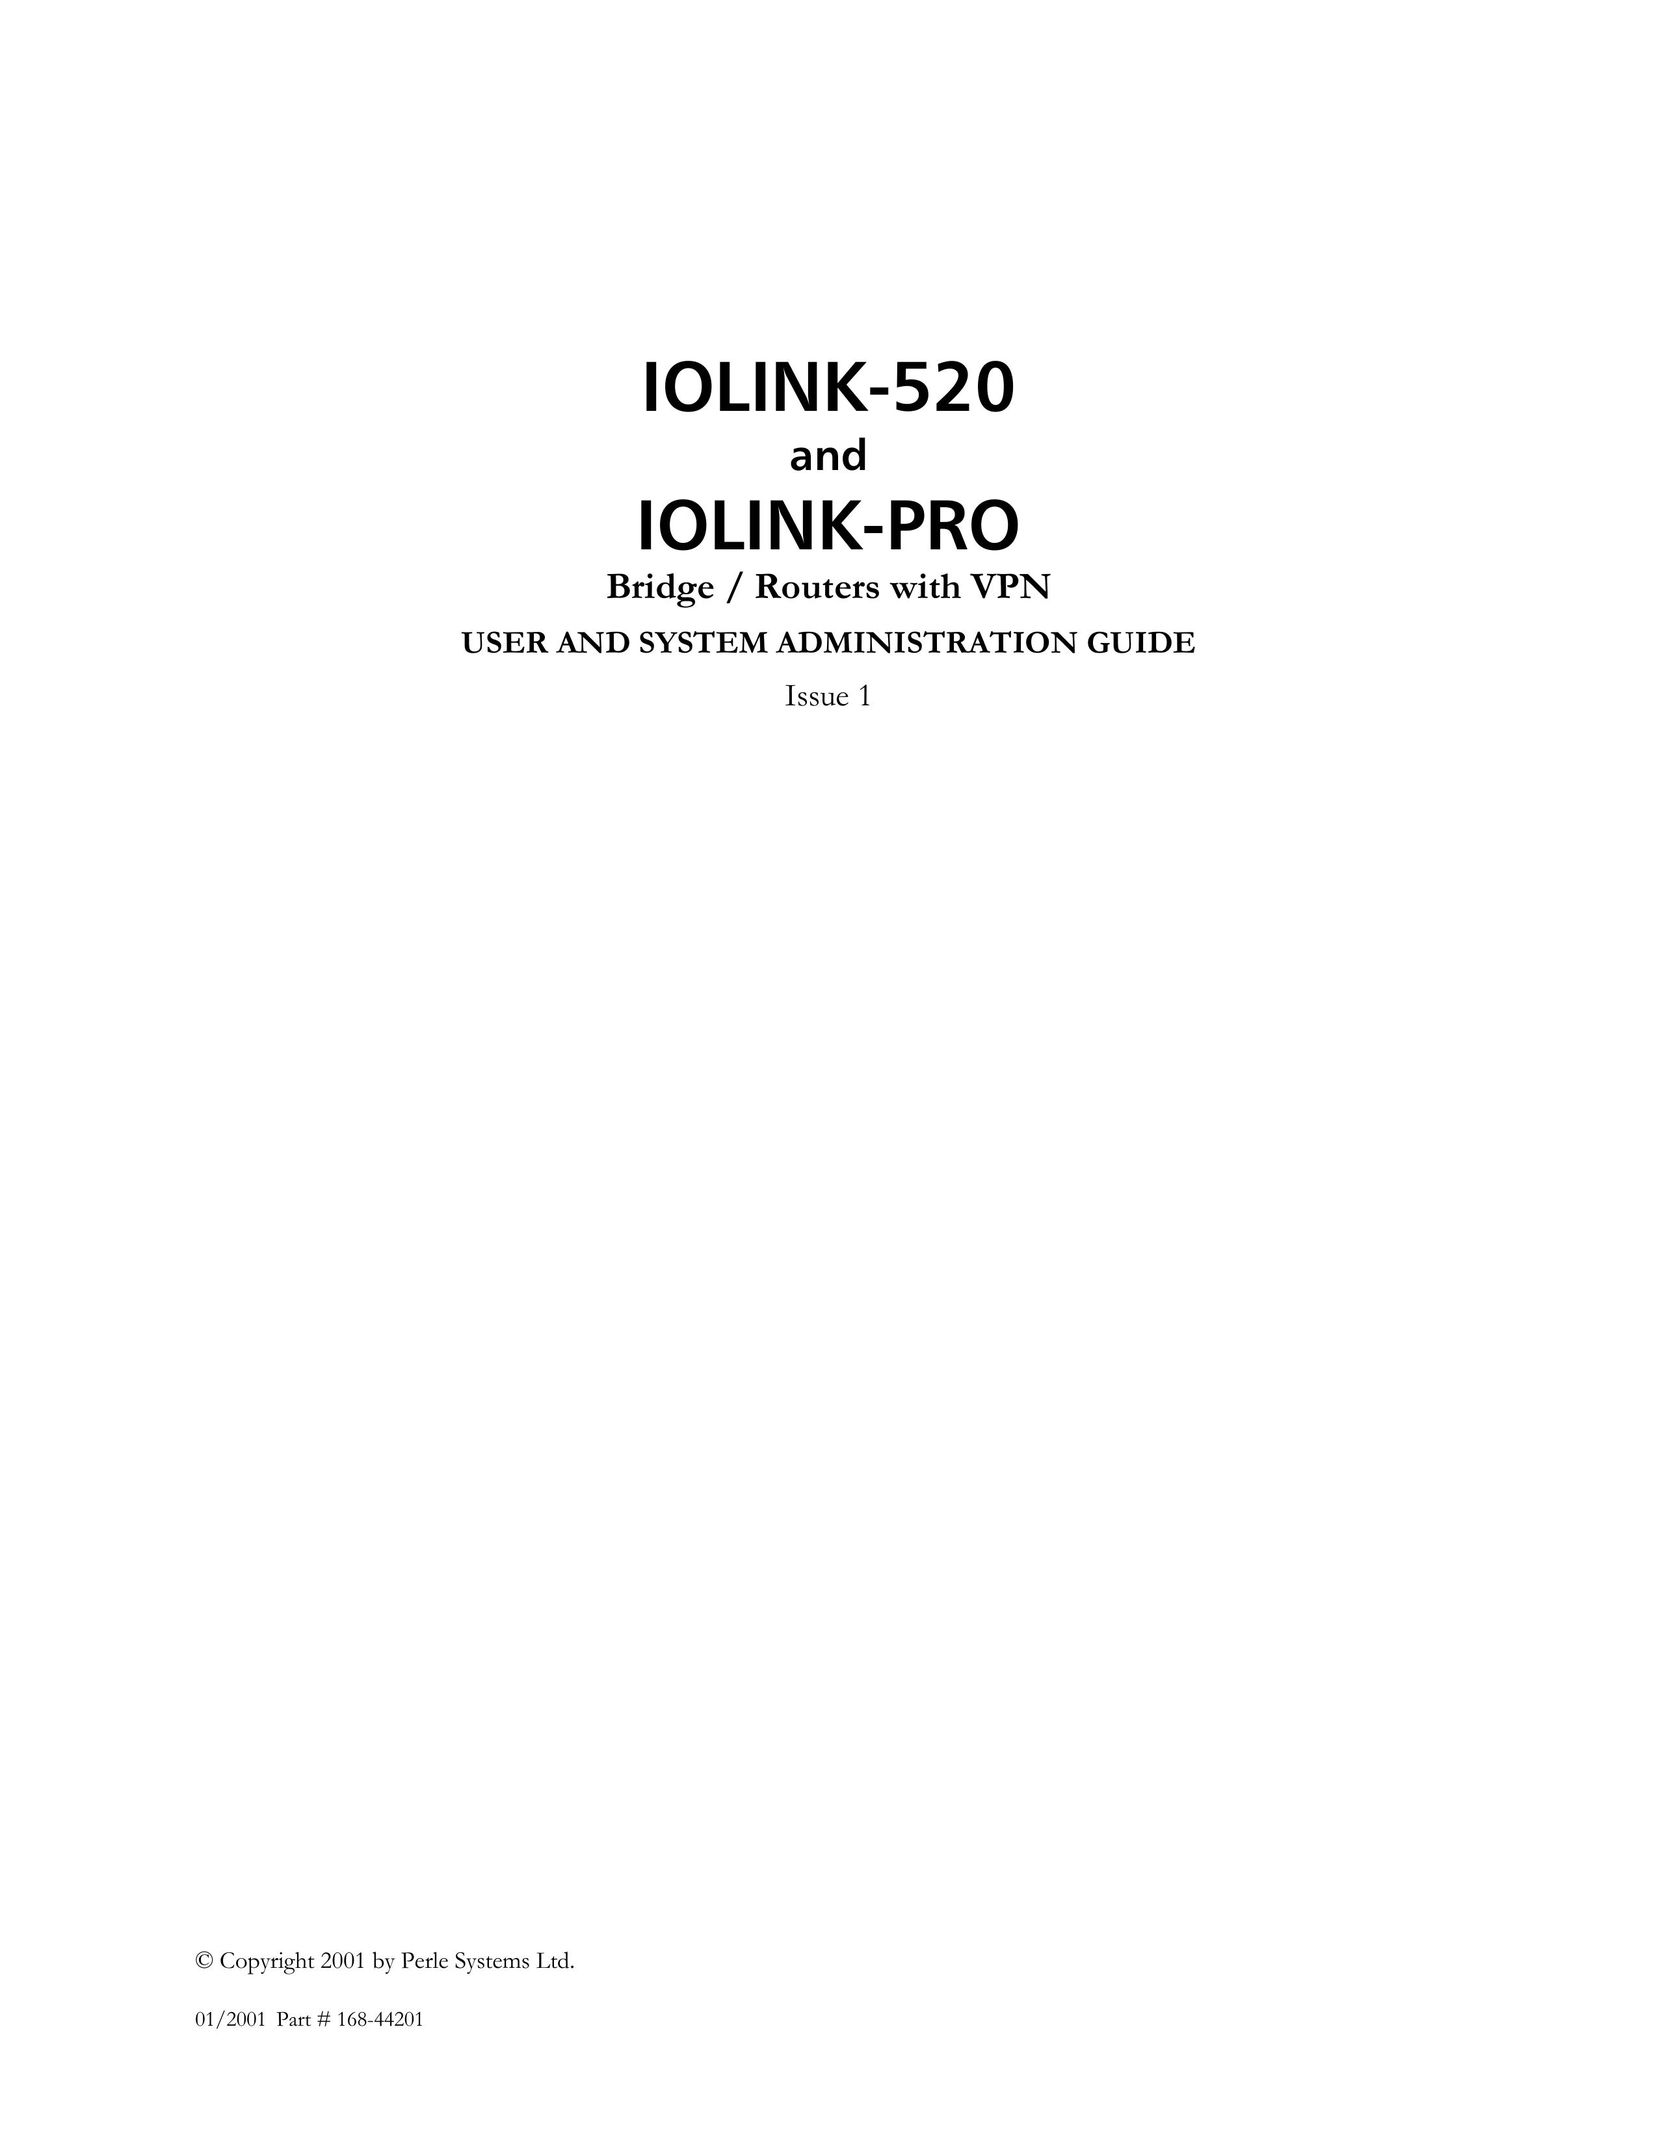 Perle Systems IOLINK-520 Network Router User Manual